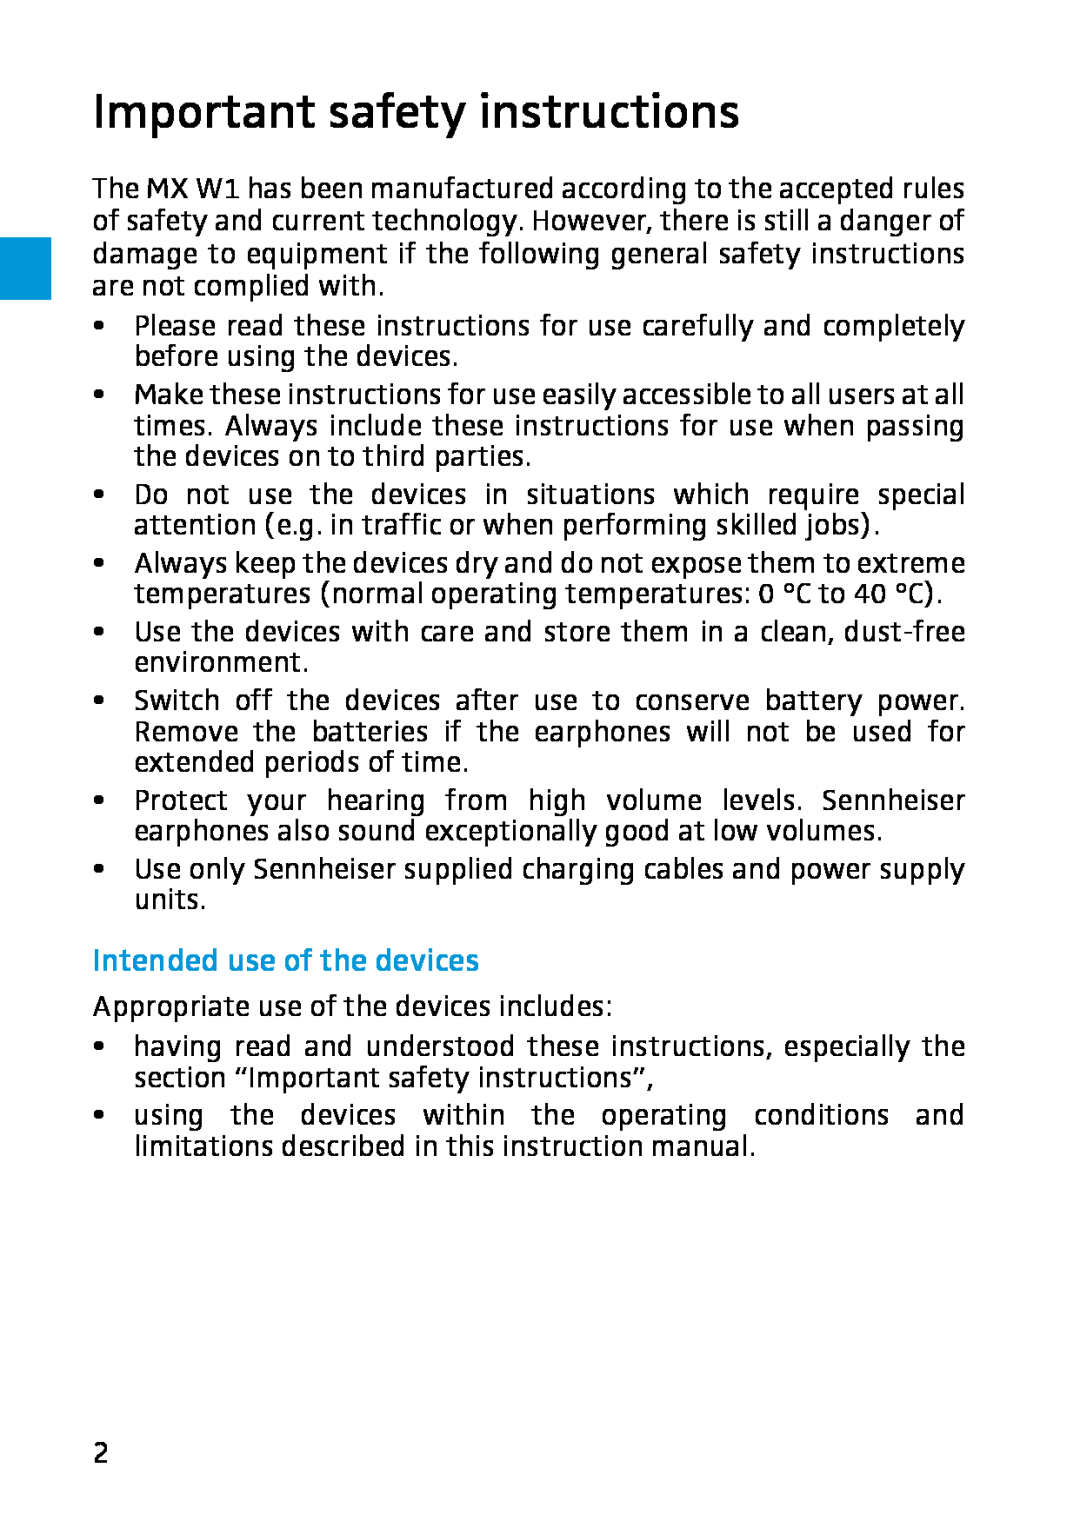 Sennheiser MX W1 instruction manual Important safety instructions, Intended use of the devices 